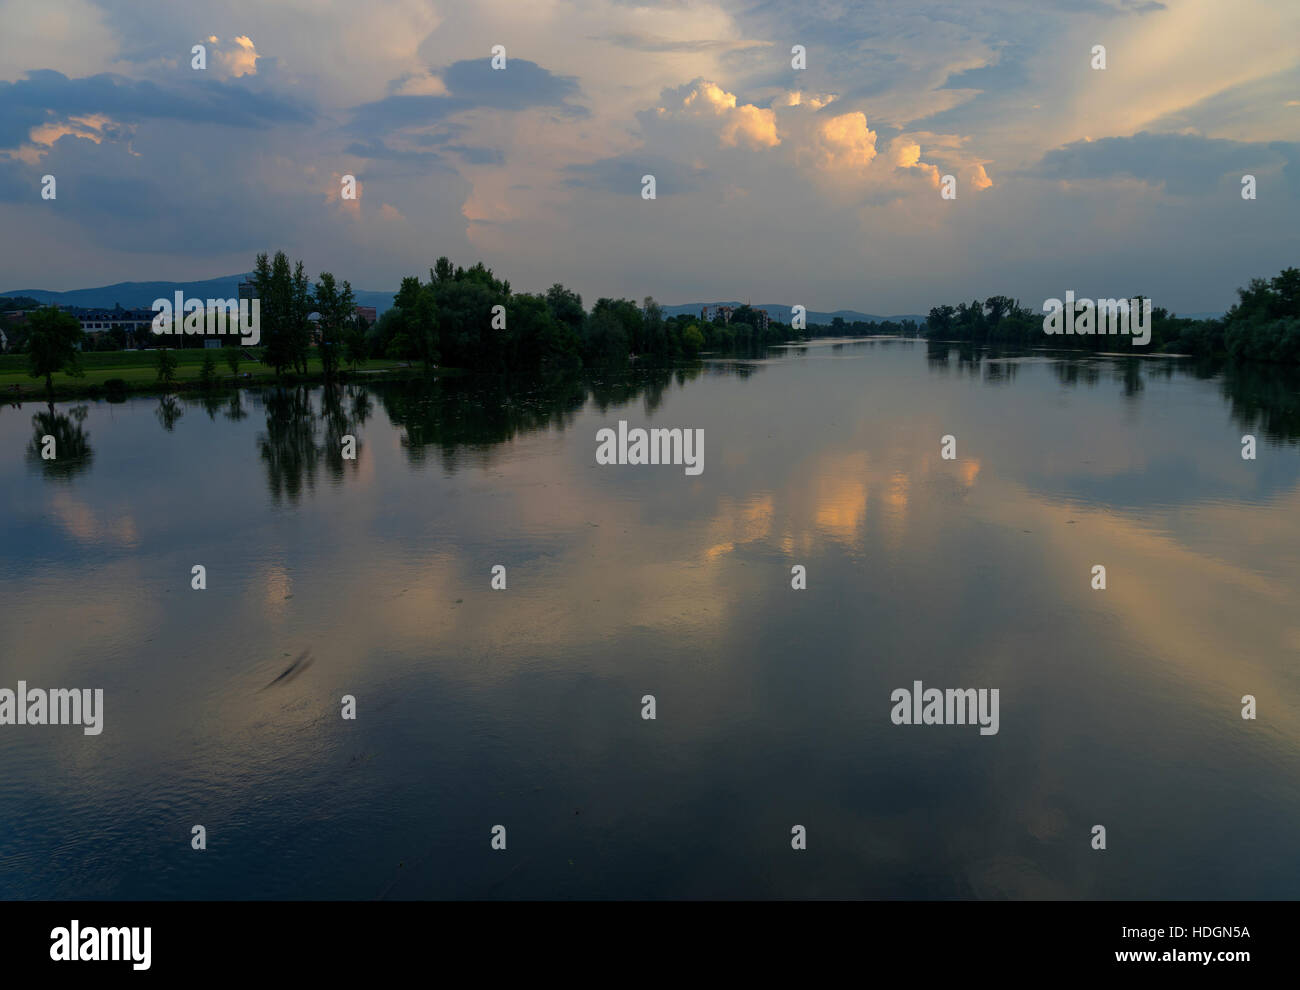 Fiume Vah riflessione Foto Stock